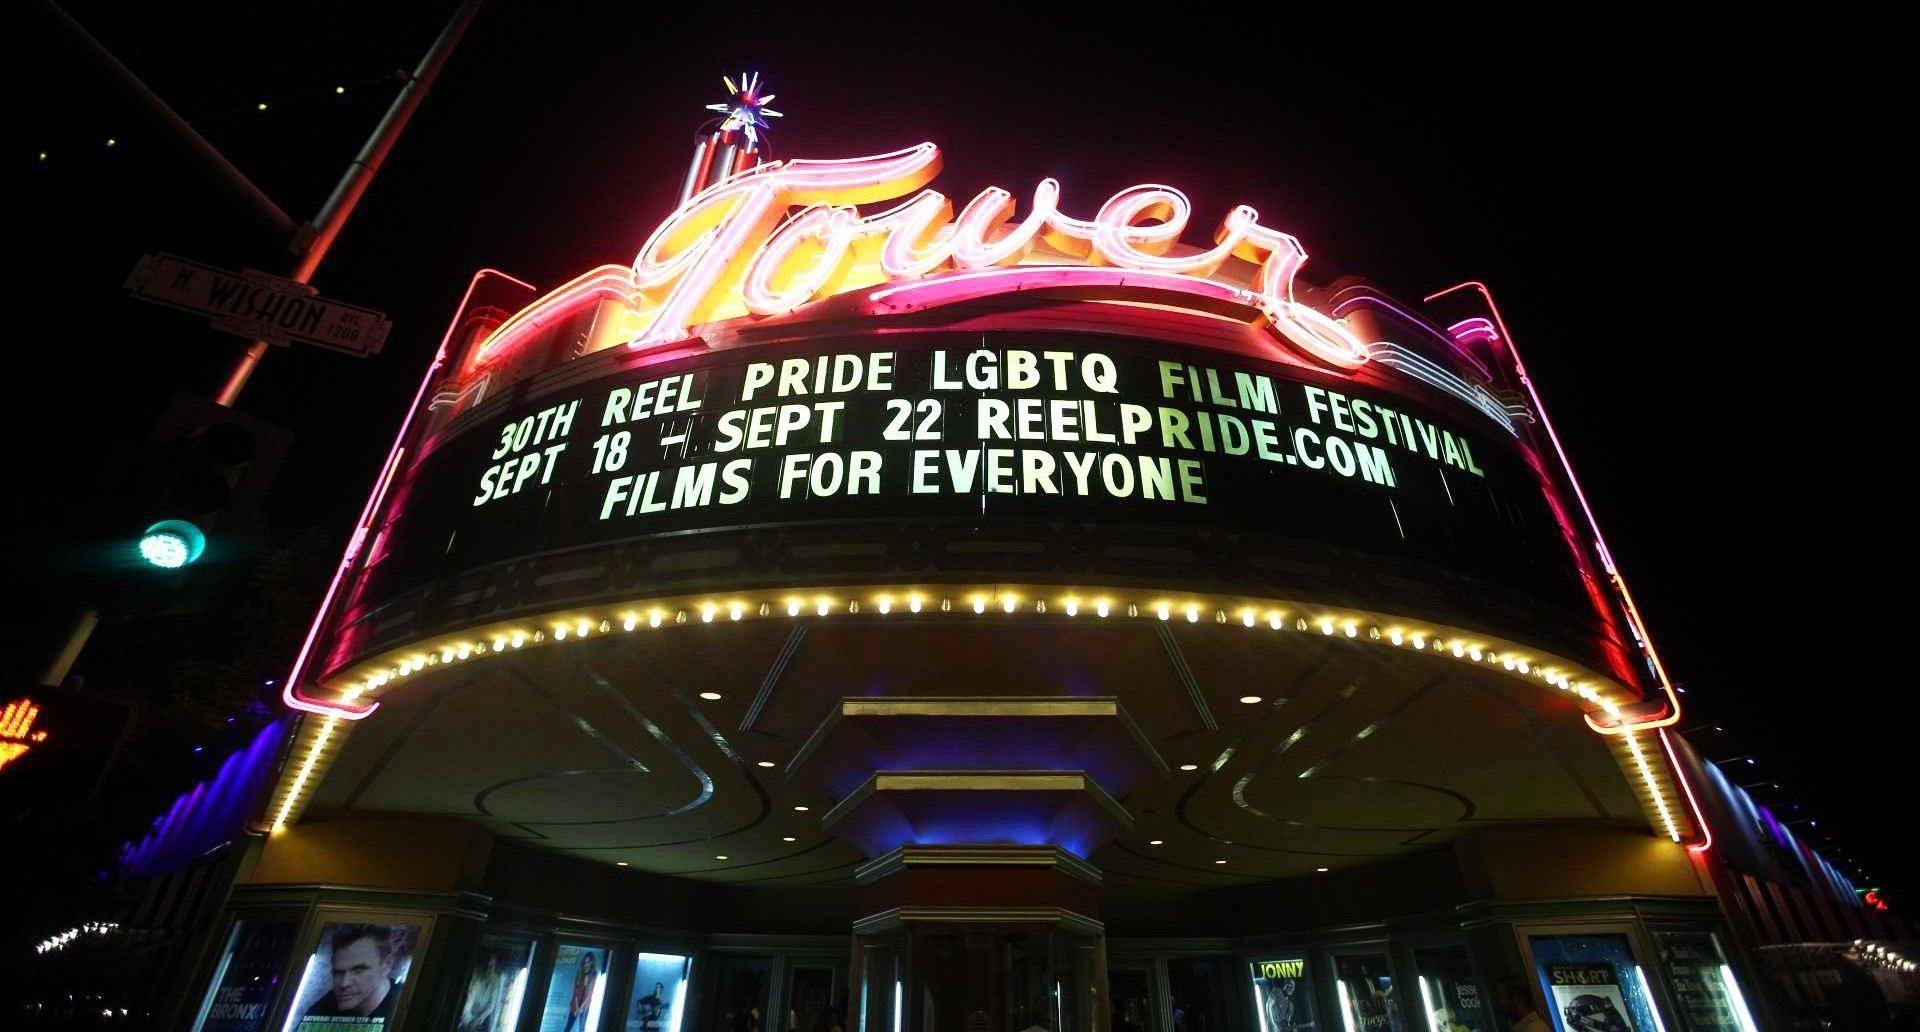 The Tower Theatre is located at 815 E. Olive Ave. and will be one of the theaters screening films for Fresnos Reel Pride Film Festival from Sept. 18 through Sept. 22. (Larry Valenzuela/The Collegian)